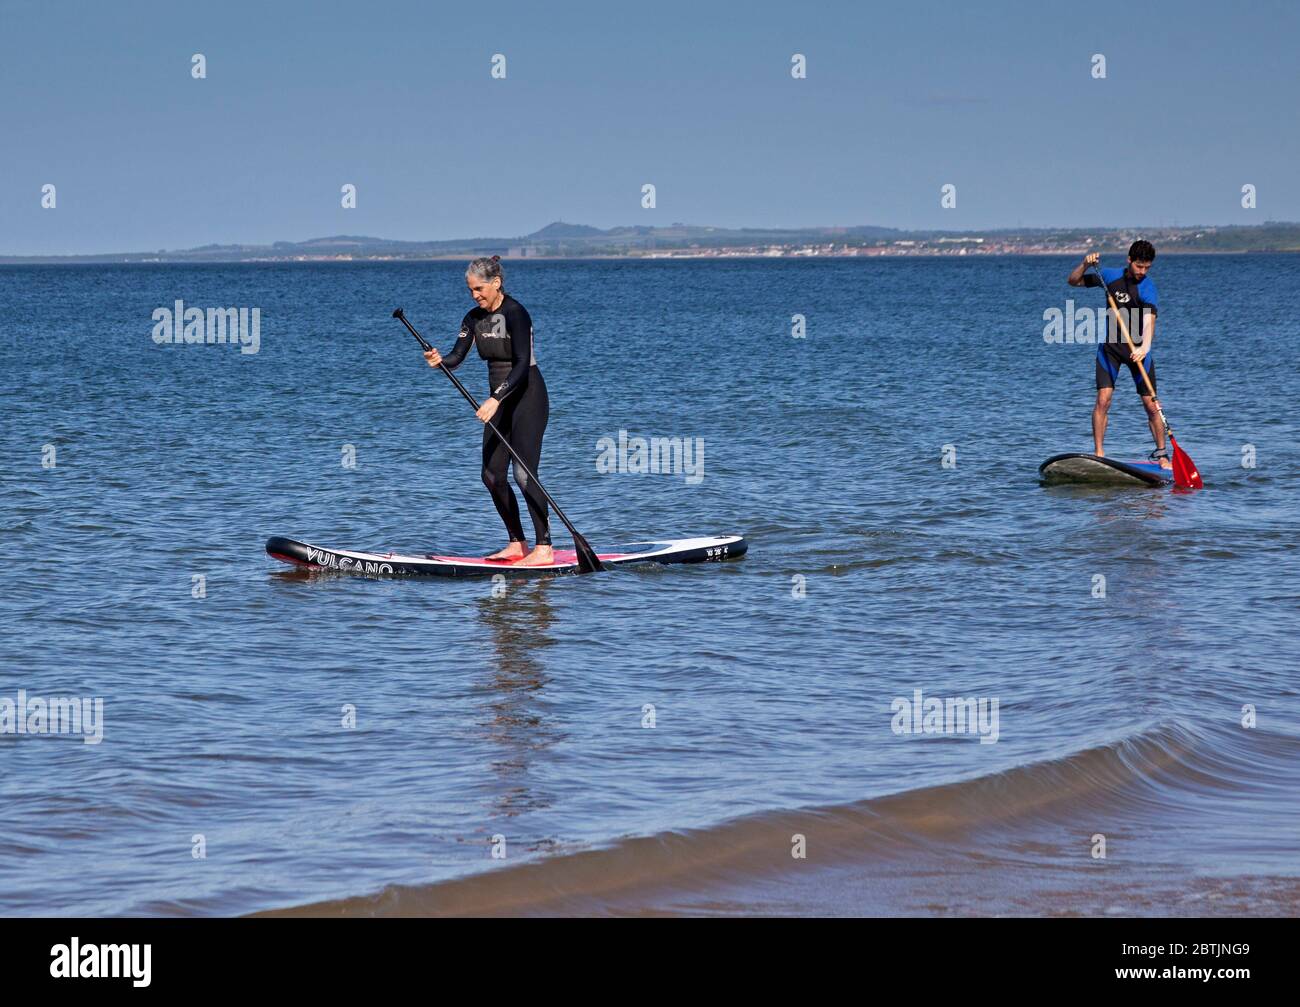 Portobello, Edinburgh, Scotland, UK. 26 May 2020. More relaxed atmosphere at the seaside late afternoon as Scotland nears the end of Phase 1 of Coronavirus Lockdown. Temperature of 19 degrees and sunny. Pictured the Harrison family, mum and her sons enjoy stand up paddle boarding. Stock Photo